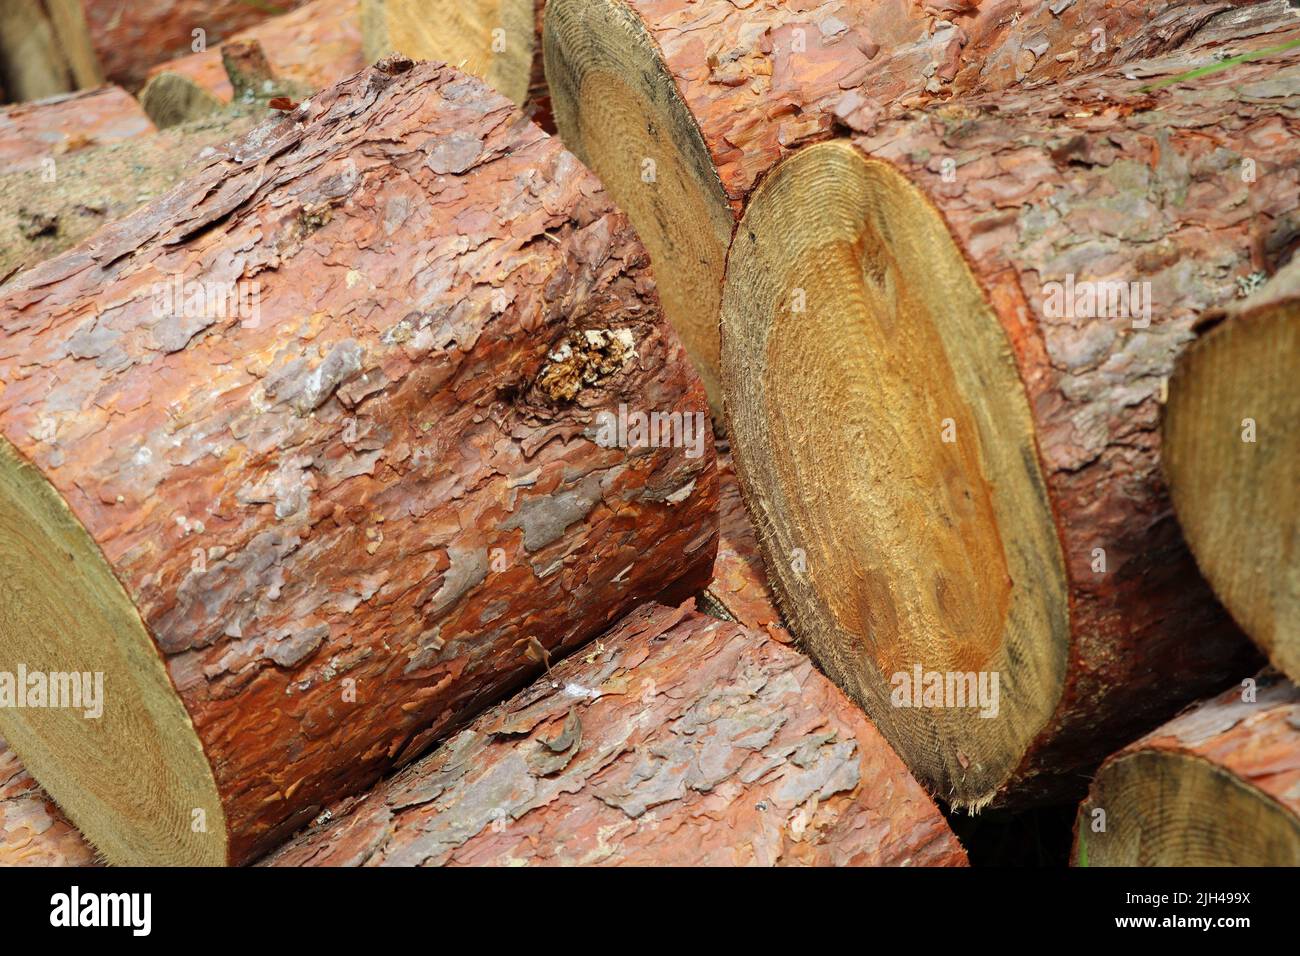 Chopped and stacked up dry firewood at the countryside. Stock pile of timber, chopped down trees Stock Photo